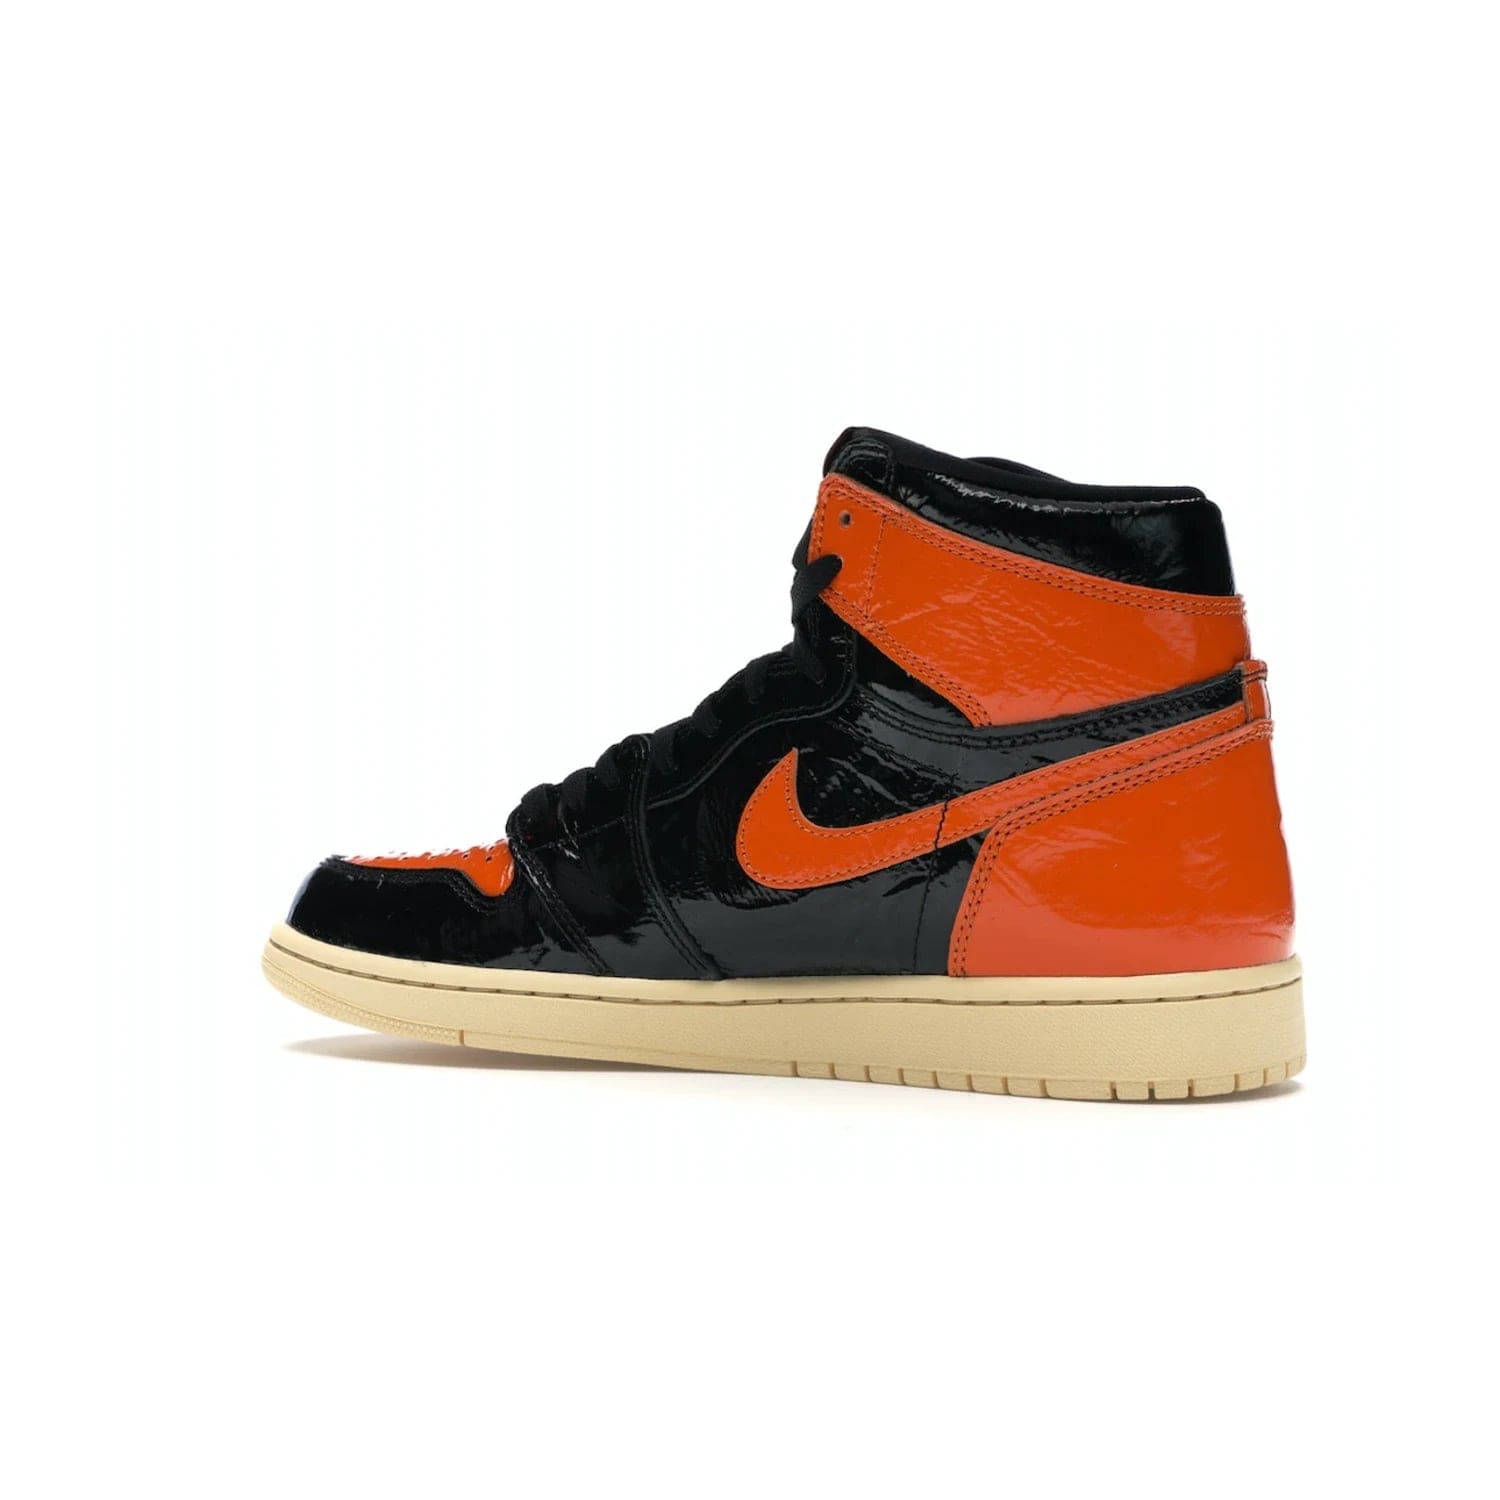 Jordan 1 Retro High Shattered Backboard 3.0 - Image 22 - Only at www.BallersClubKickz.com - #
Jordan 1 Retro High Shattered Backboard 3.0: the perfect blend of modern style and nostalgic flair featuring an orange and black crinkled patent leather upper and yellowed vanilla outsole. Get these exclusive sneakers released in October of 2019!